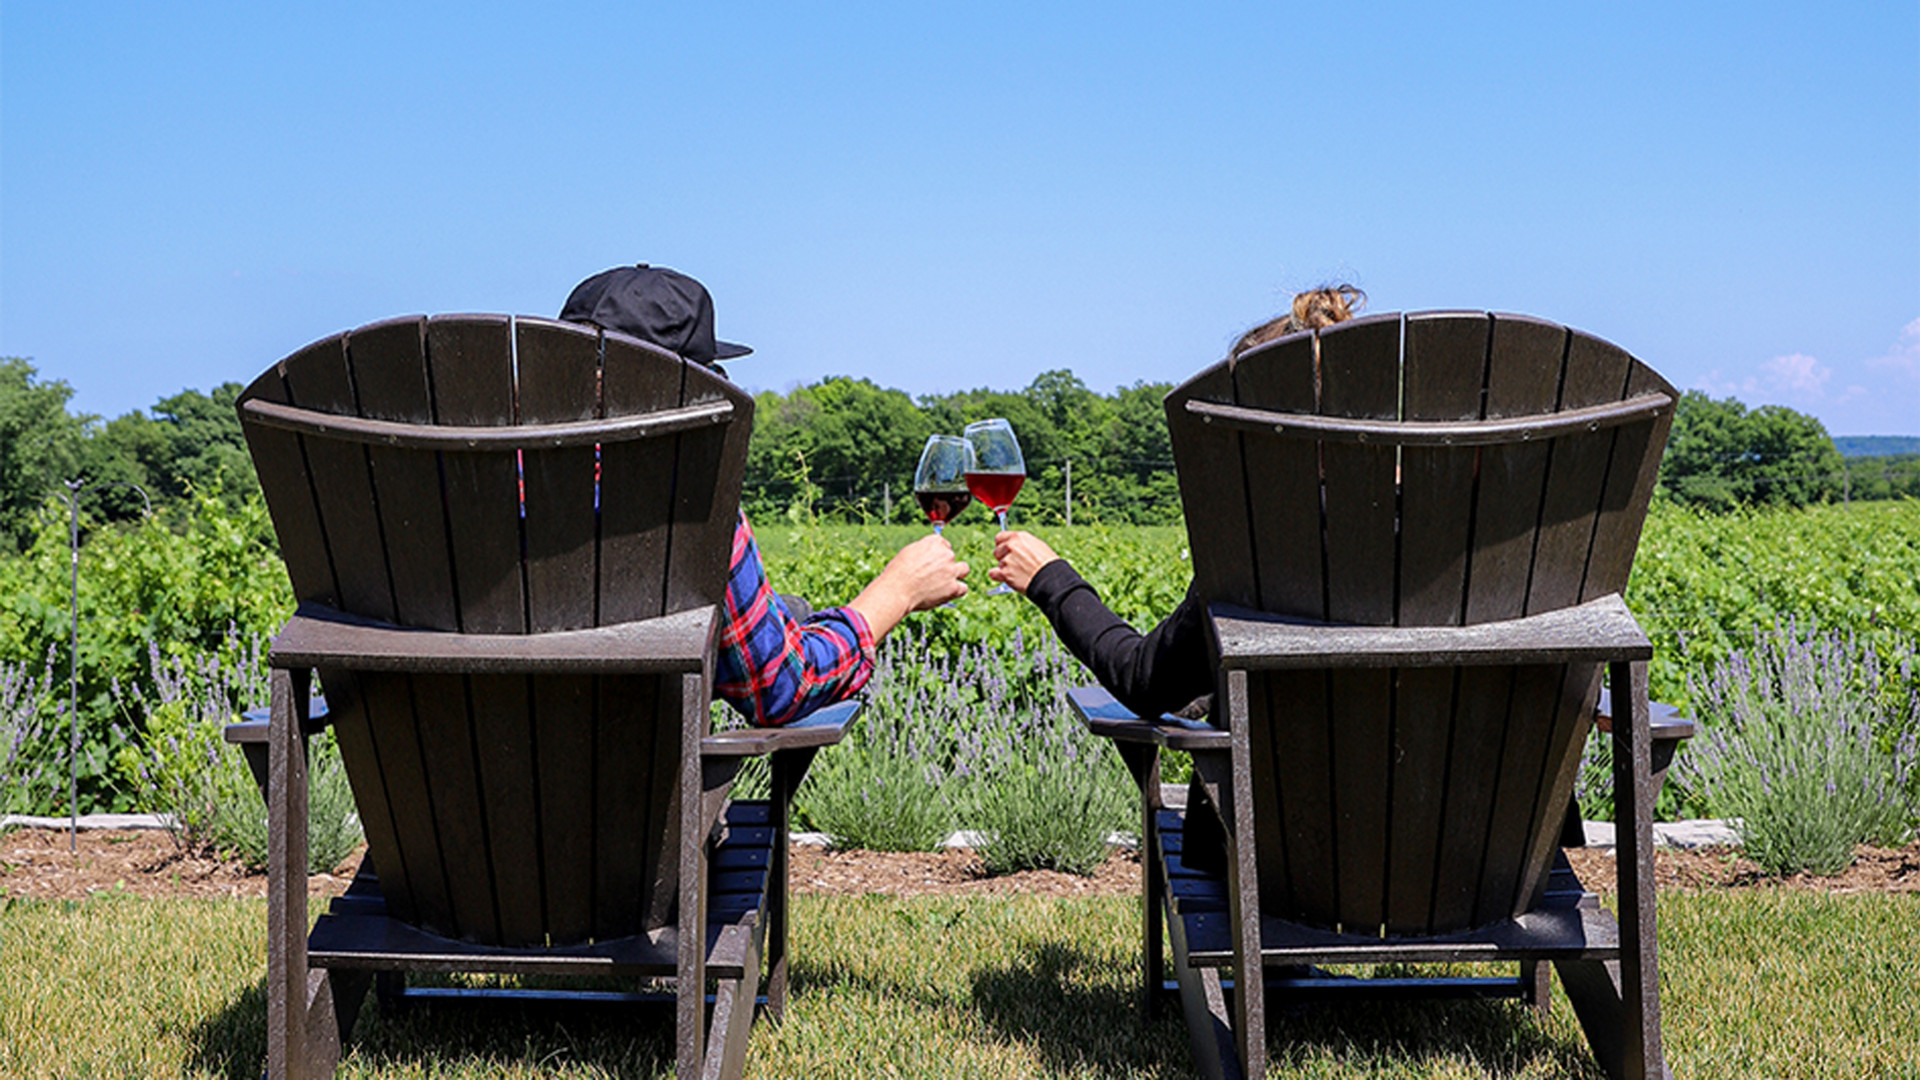 The best wineries in Niagara-on-the-Lake | Muskoka chair wine tasting at Rosewood Estates Winery